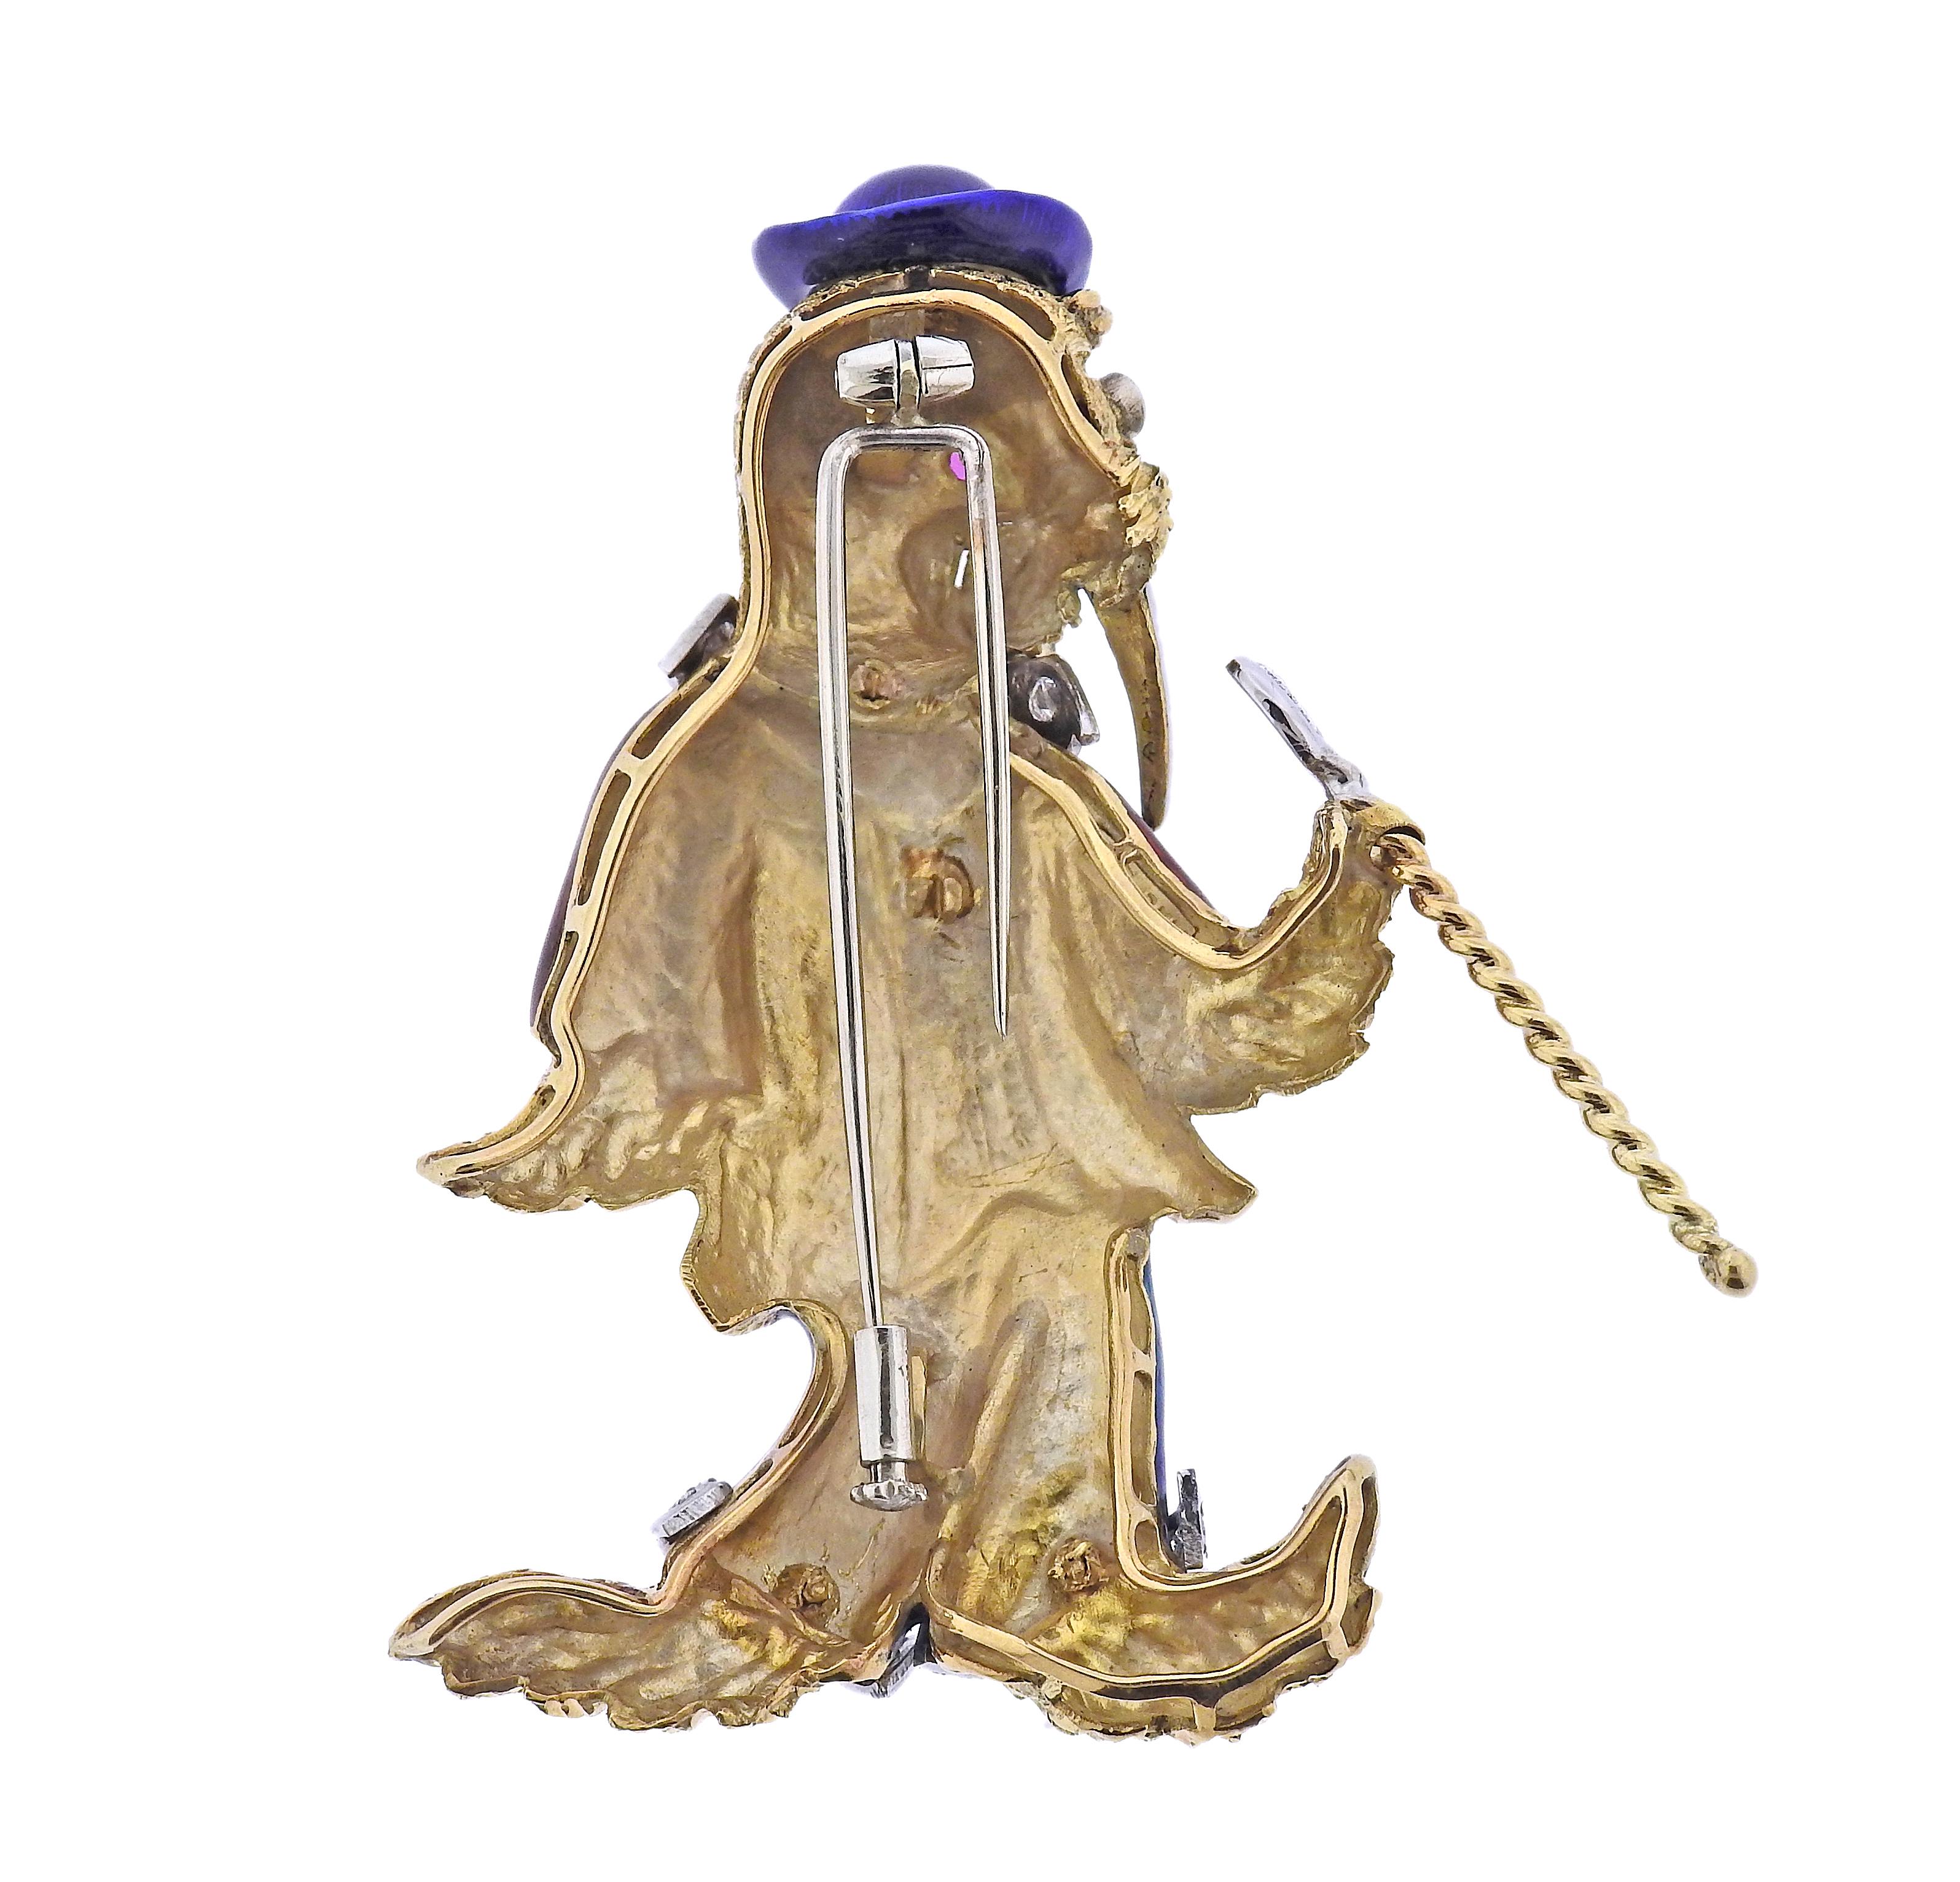 Whimsical 18k gold Italian made walrus brooch, decorated with enamel, ruby eyes 0.66ctw in diamonds. Walrus with movable stick. Brooch measures 2.5